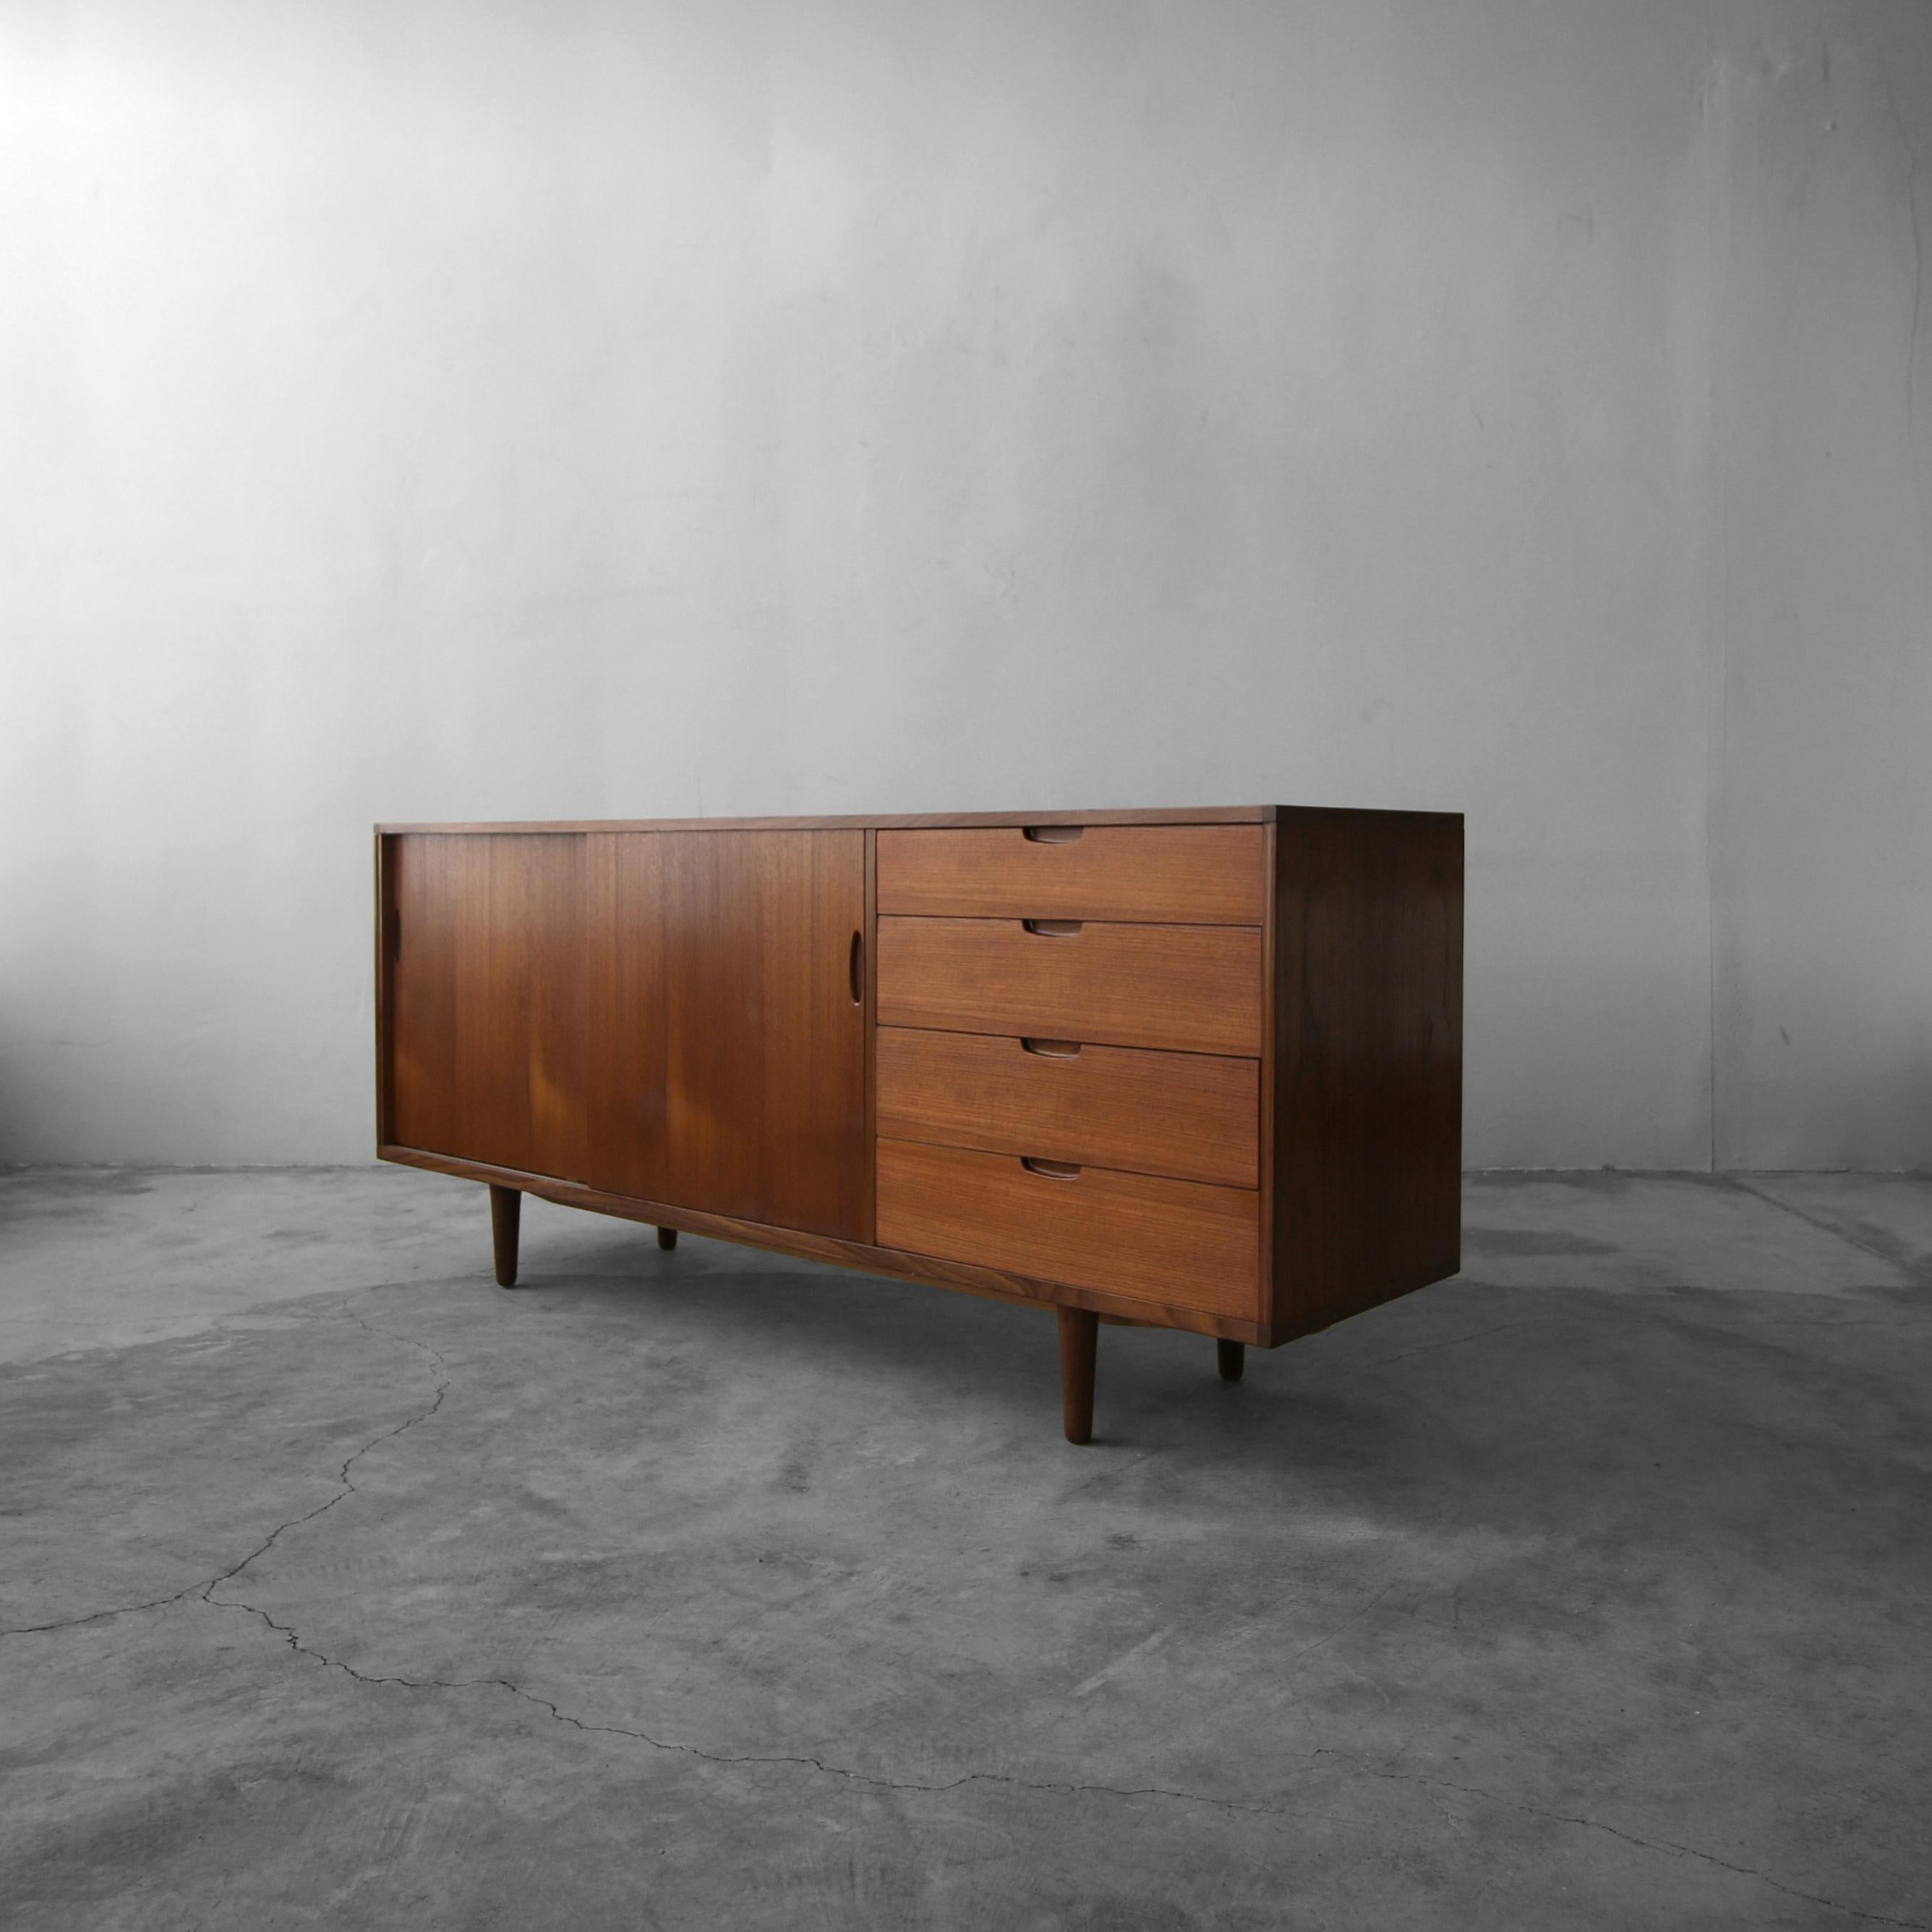 Simply perfect Danish teak credenza by Ib Kofod-Larsen for Clausen and Sons. The simplicity and clean lines make this beauty a Classic. A little bit shorter in length than a lot of Danish credenzas at 6 foot, this may be the perfect piece you've